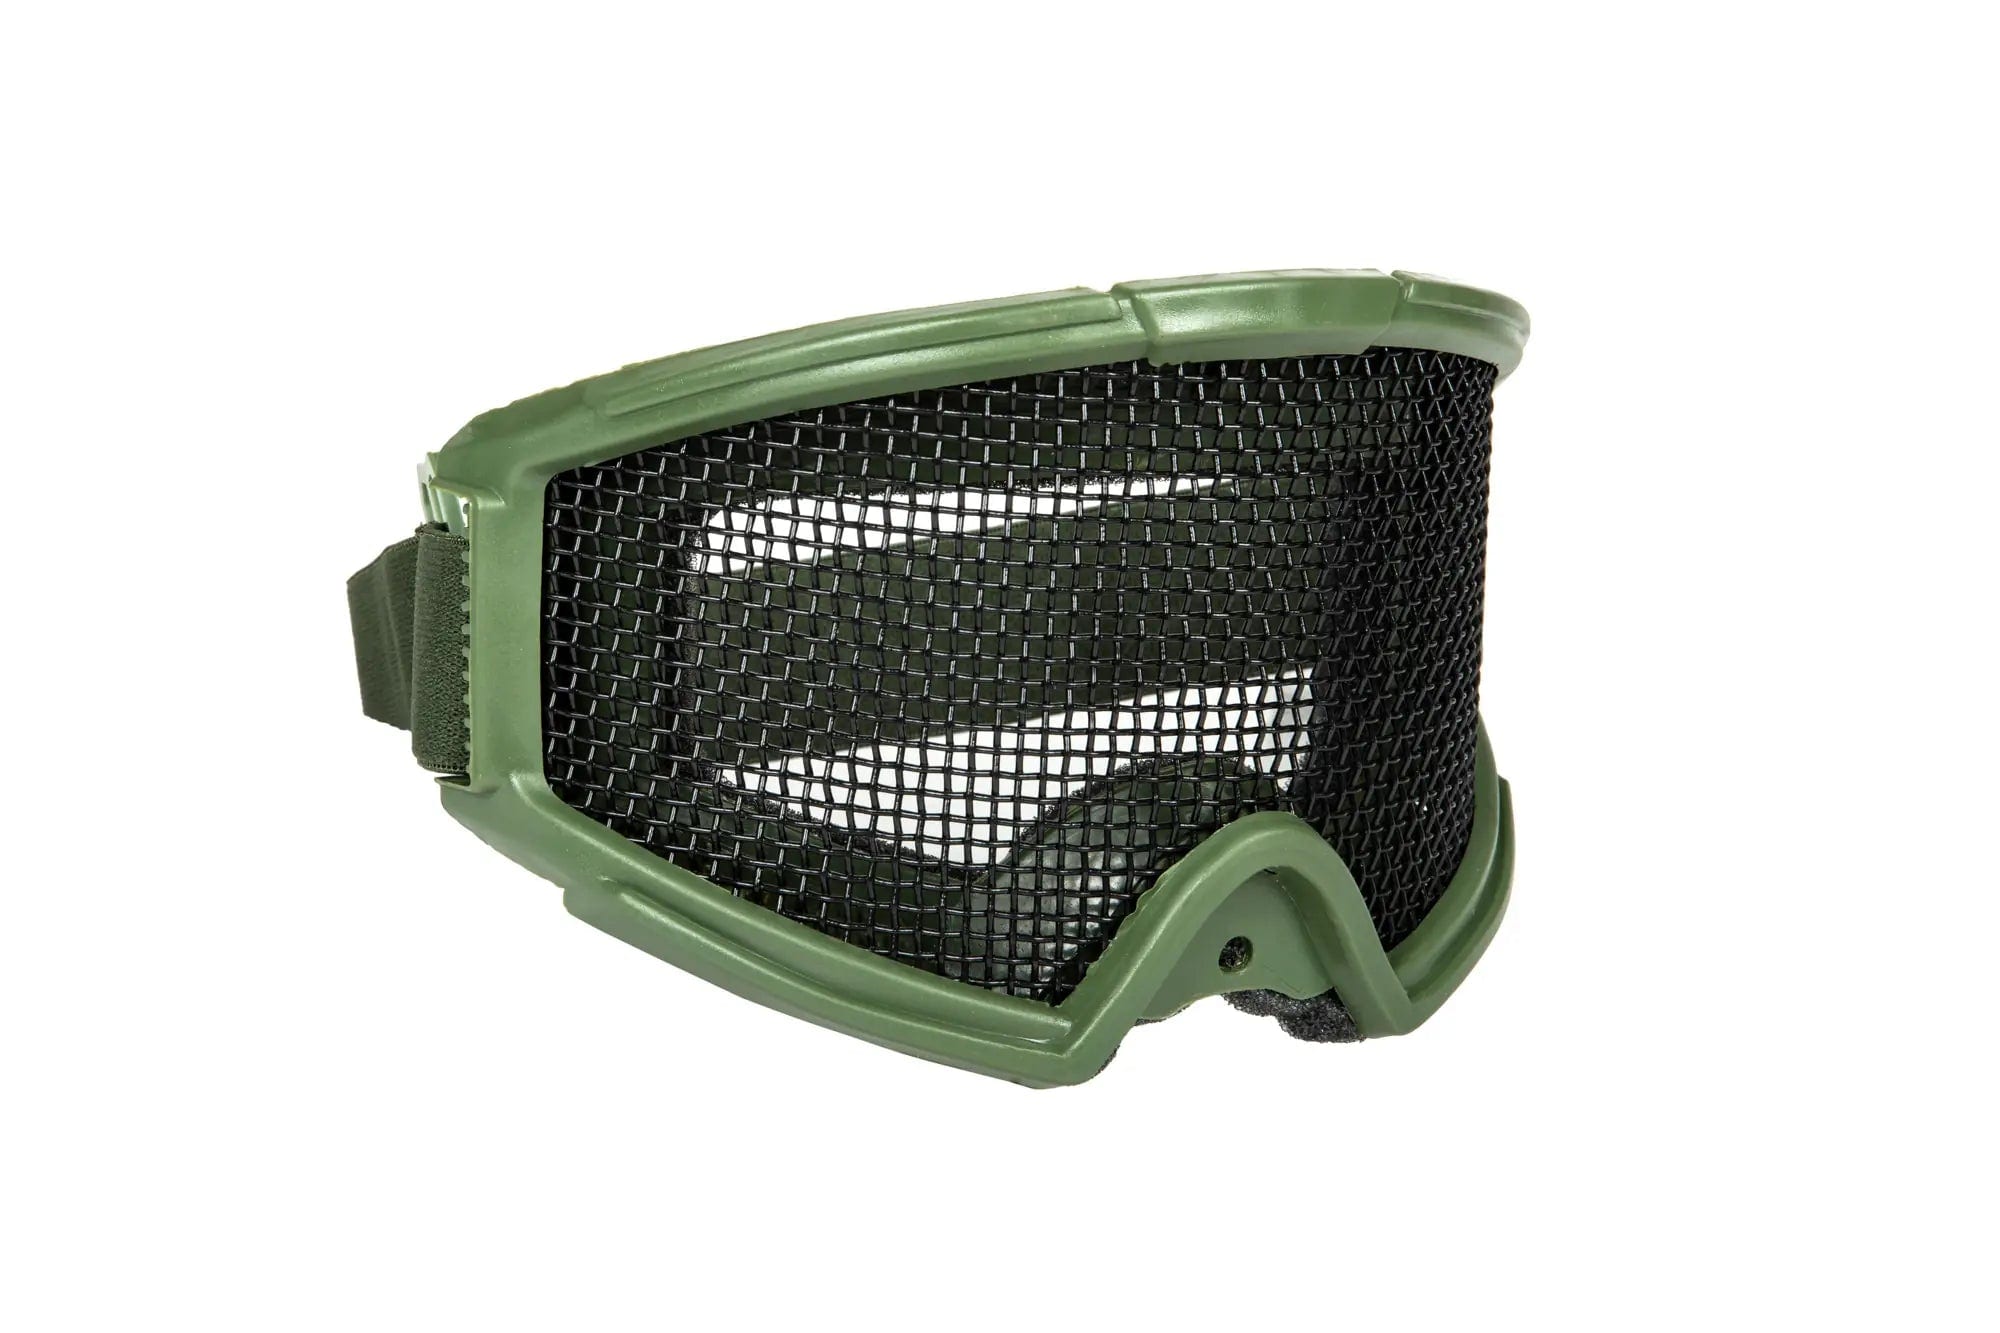 Tactical goggles with mesh - Olive